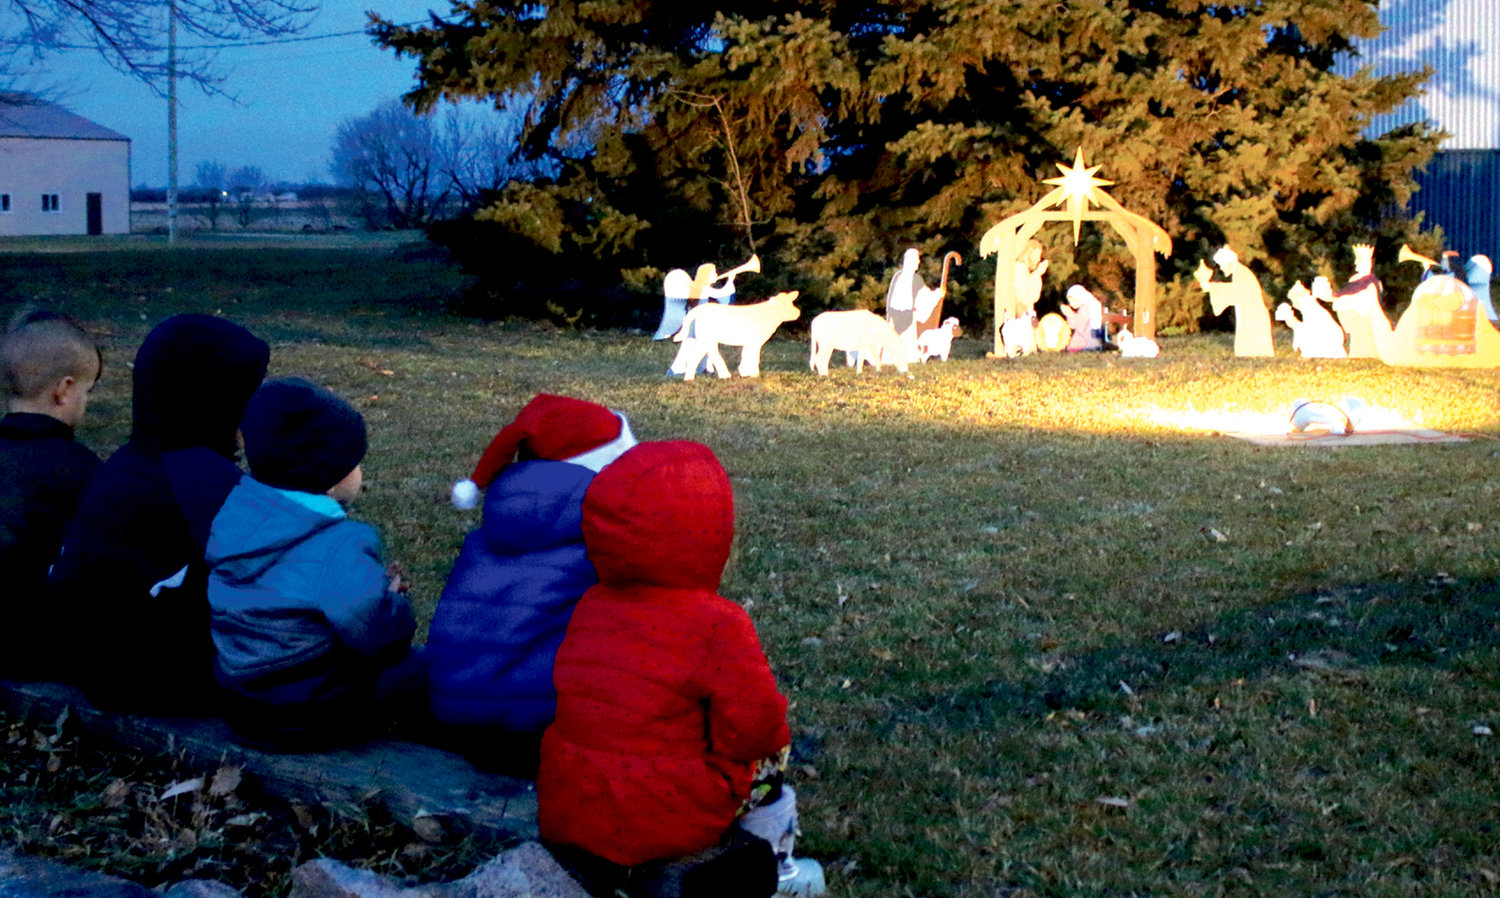 On Sunday evening at sunset in Oldham, residents and children gathered to see the Lighting of the Nativity. The lighting has been a tradition for close to thirty years. Once the Nativity was lit, the crowd sang “Away in a Manger” and other songs. The group moved to the high school gym and had a barbeque supper, games including BINGO and other Christmas activities.